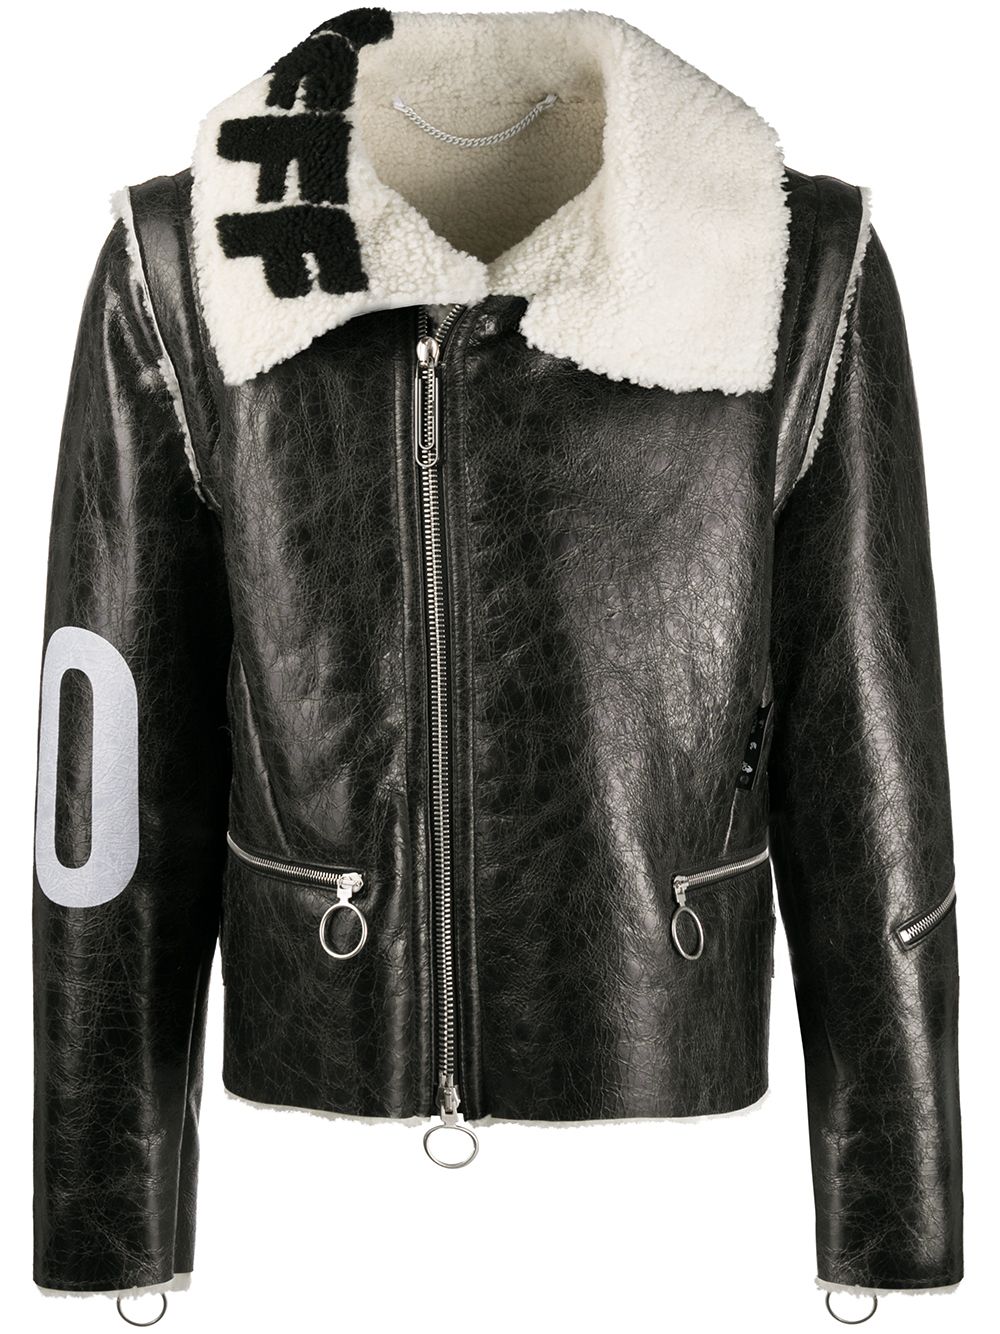 OFF-WHITE Leather Shearling Zip Jacket Black/White